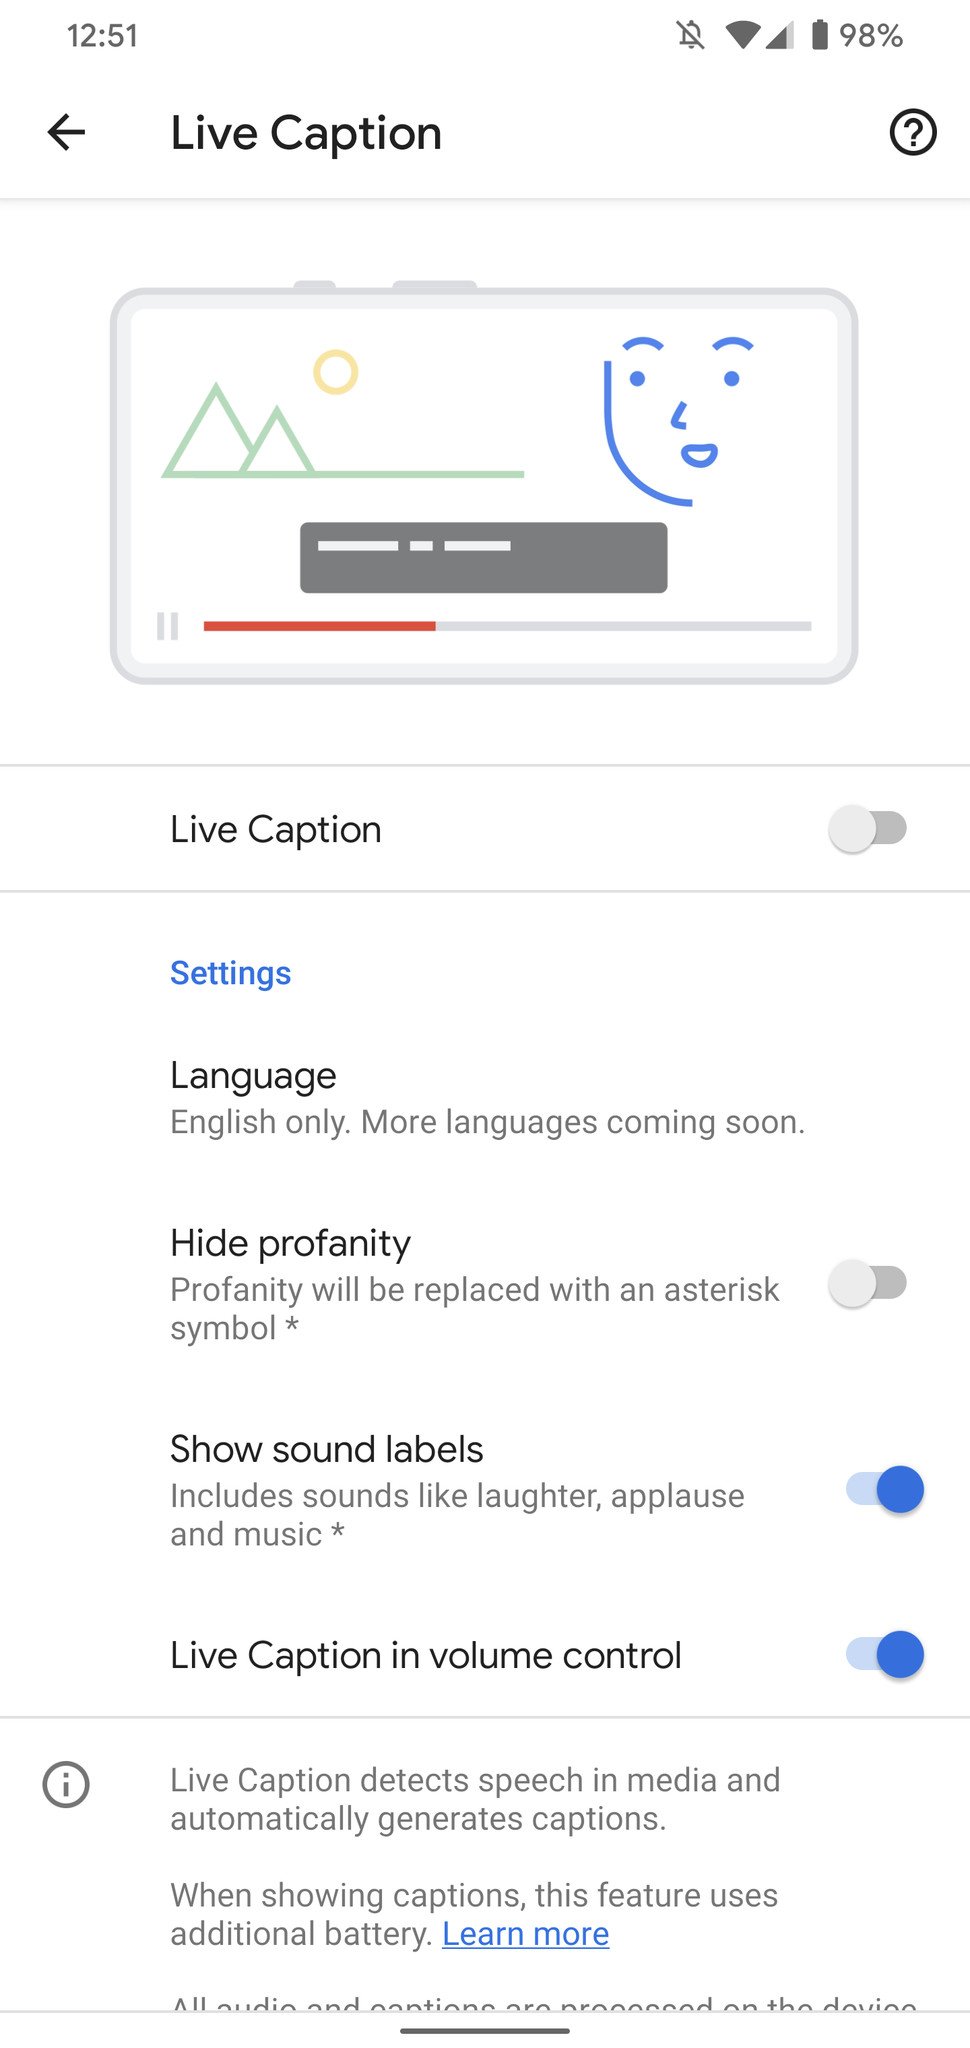 Live Caption settings for the Pixel 4